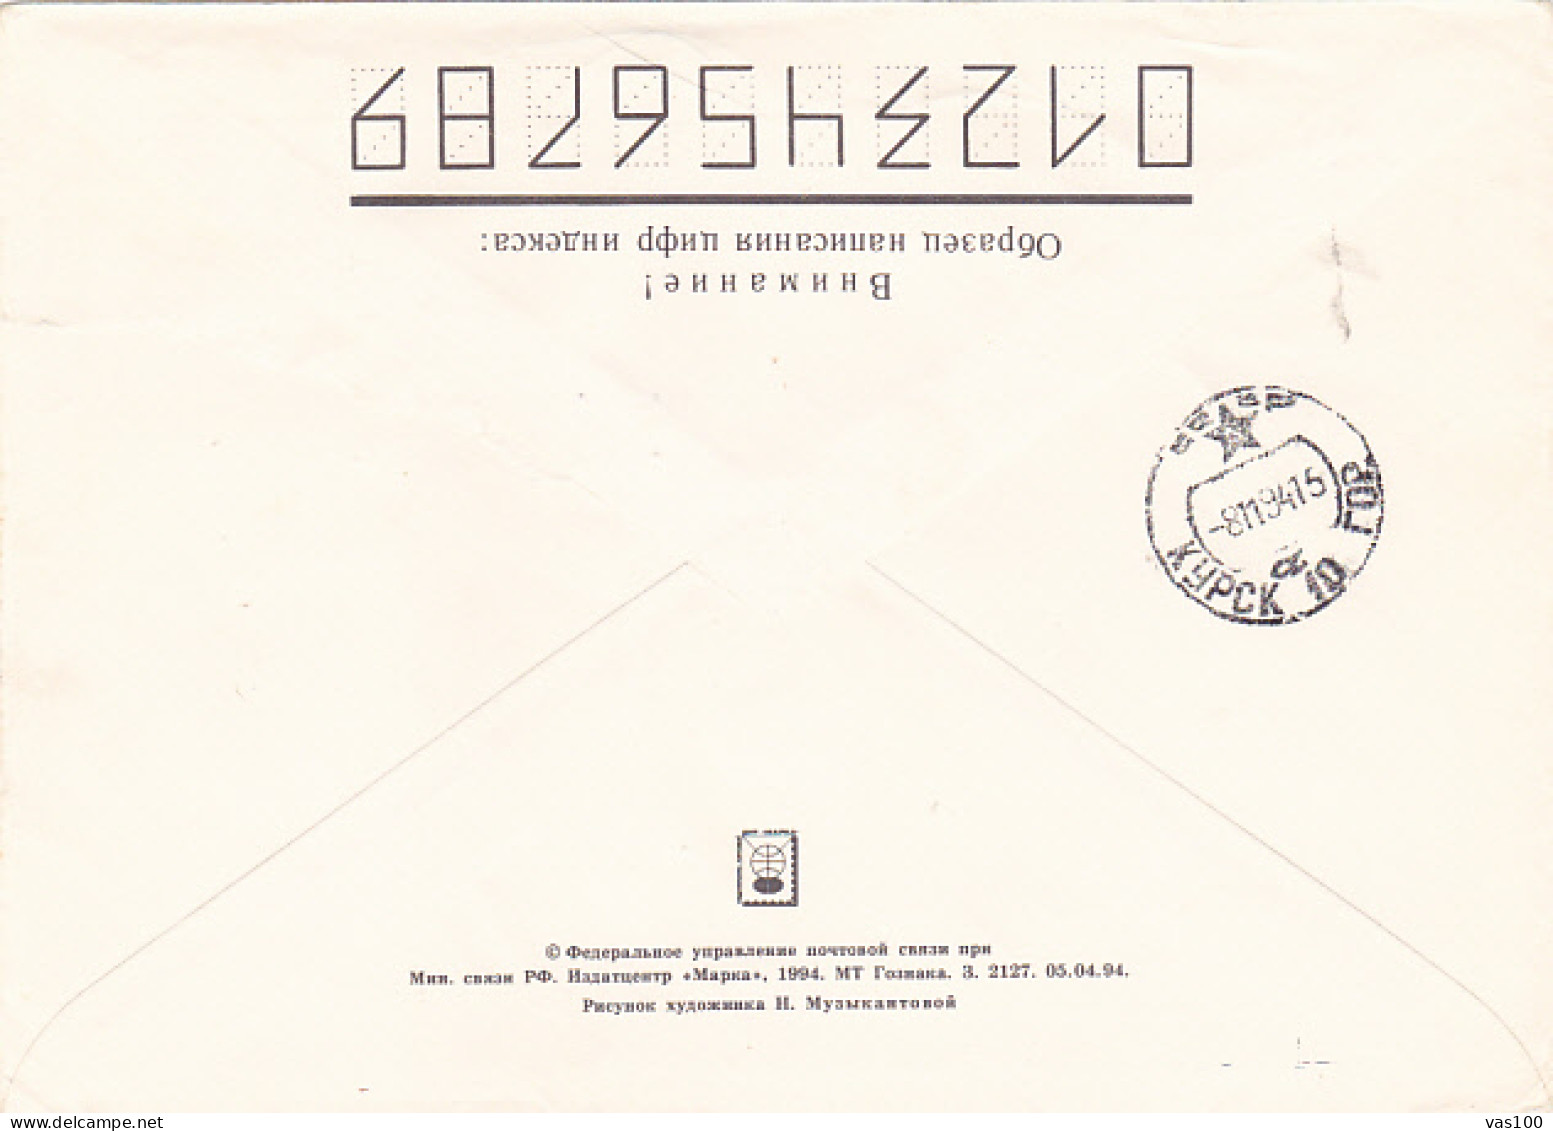 MOSCOW PAVELETSKY RAILWAY STATION, COVER STATIONERY, ENTIER POSTAL, 1994, RUSSIA - Enteros Postales